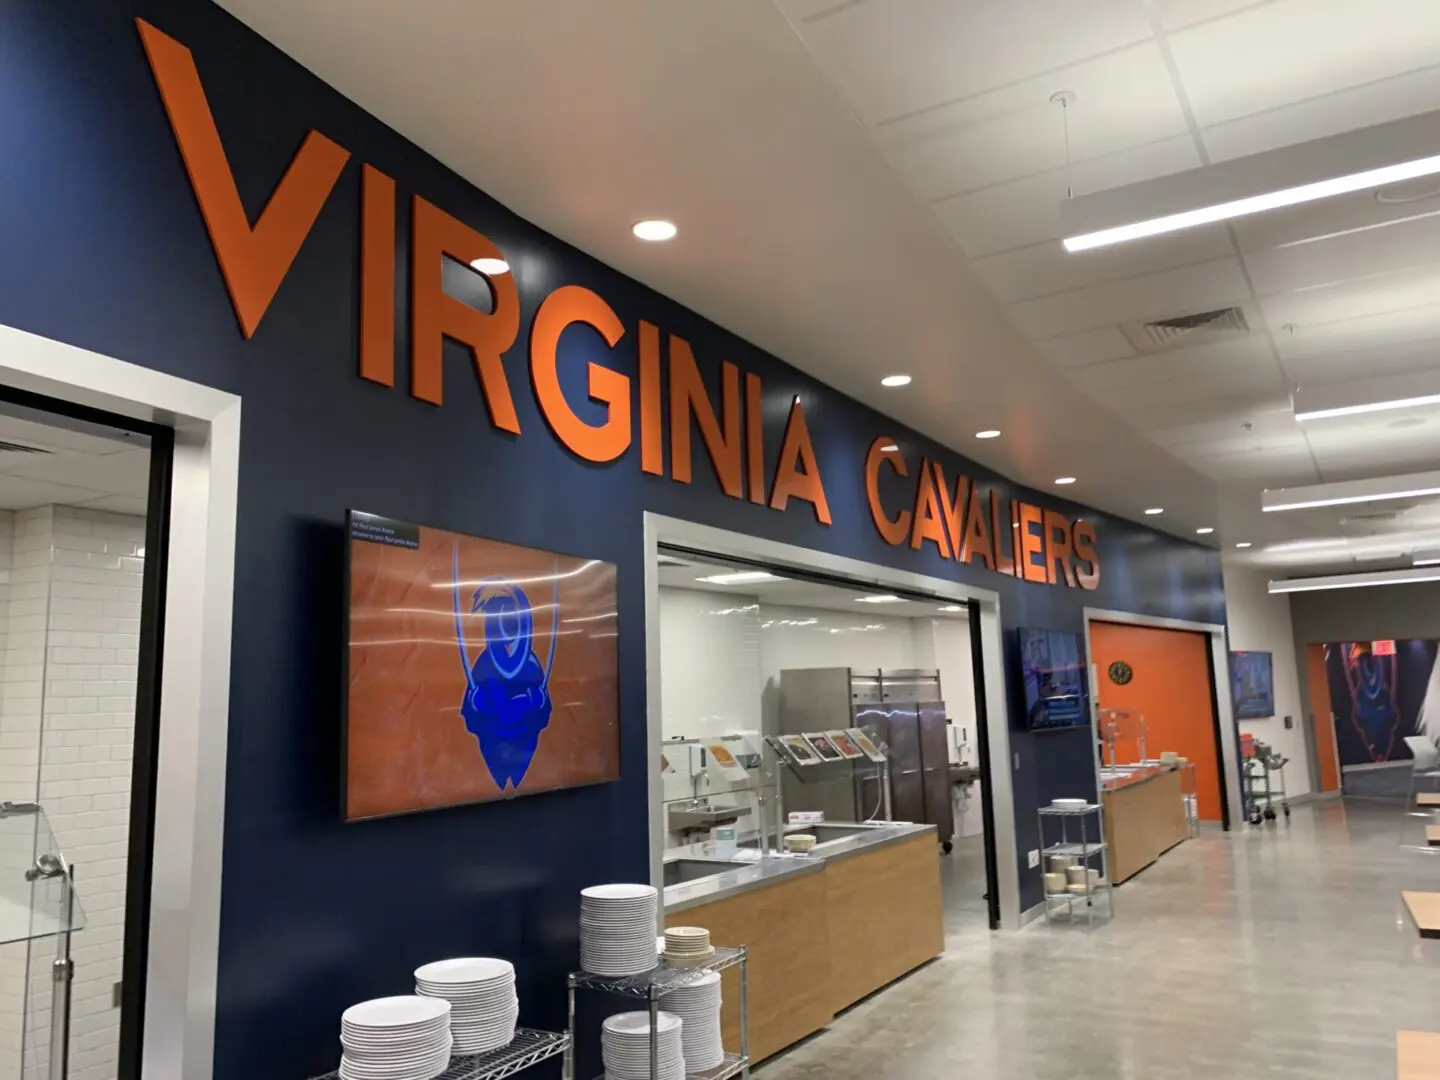 A virginia cavaliers sign in the middle of an airport.